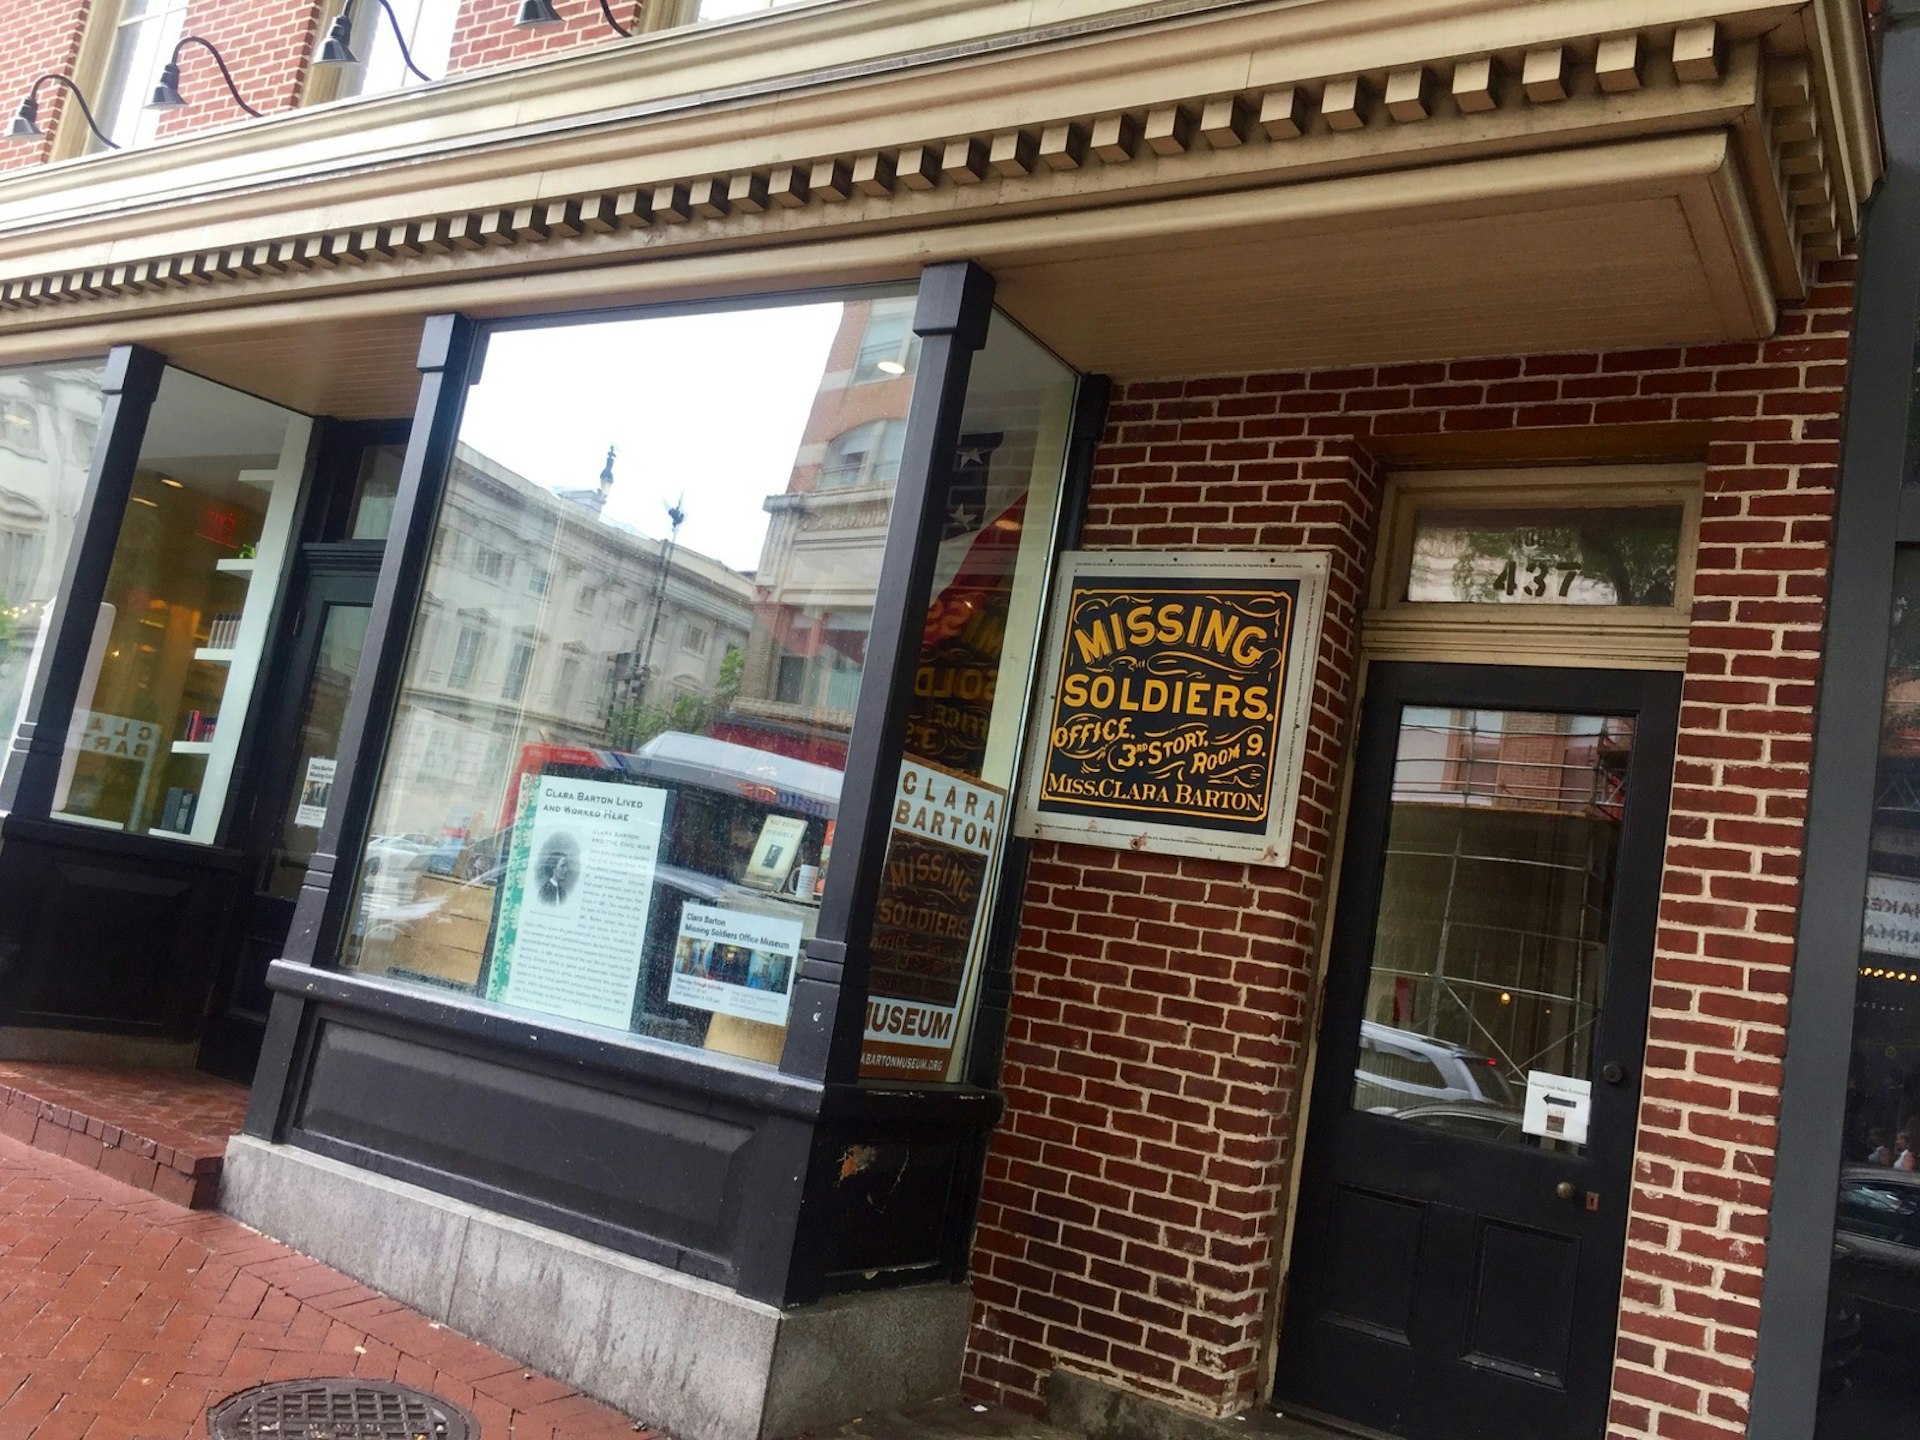 A sign on a brick storefront advertises the Clara Barton Missing Soldiers Office Museum in Washington, DC